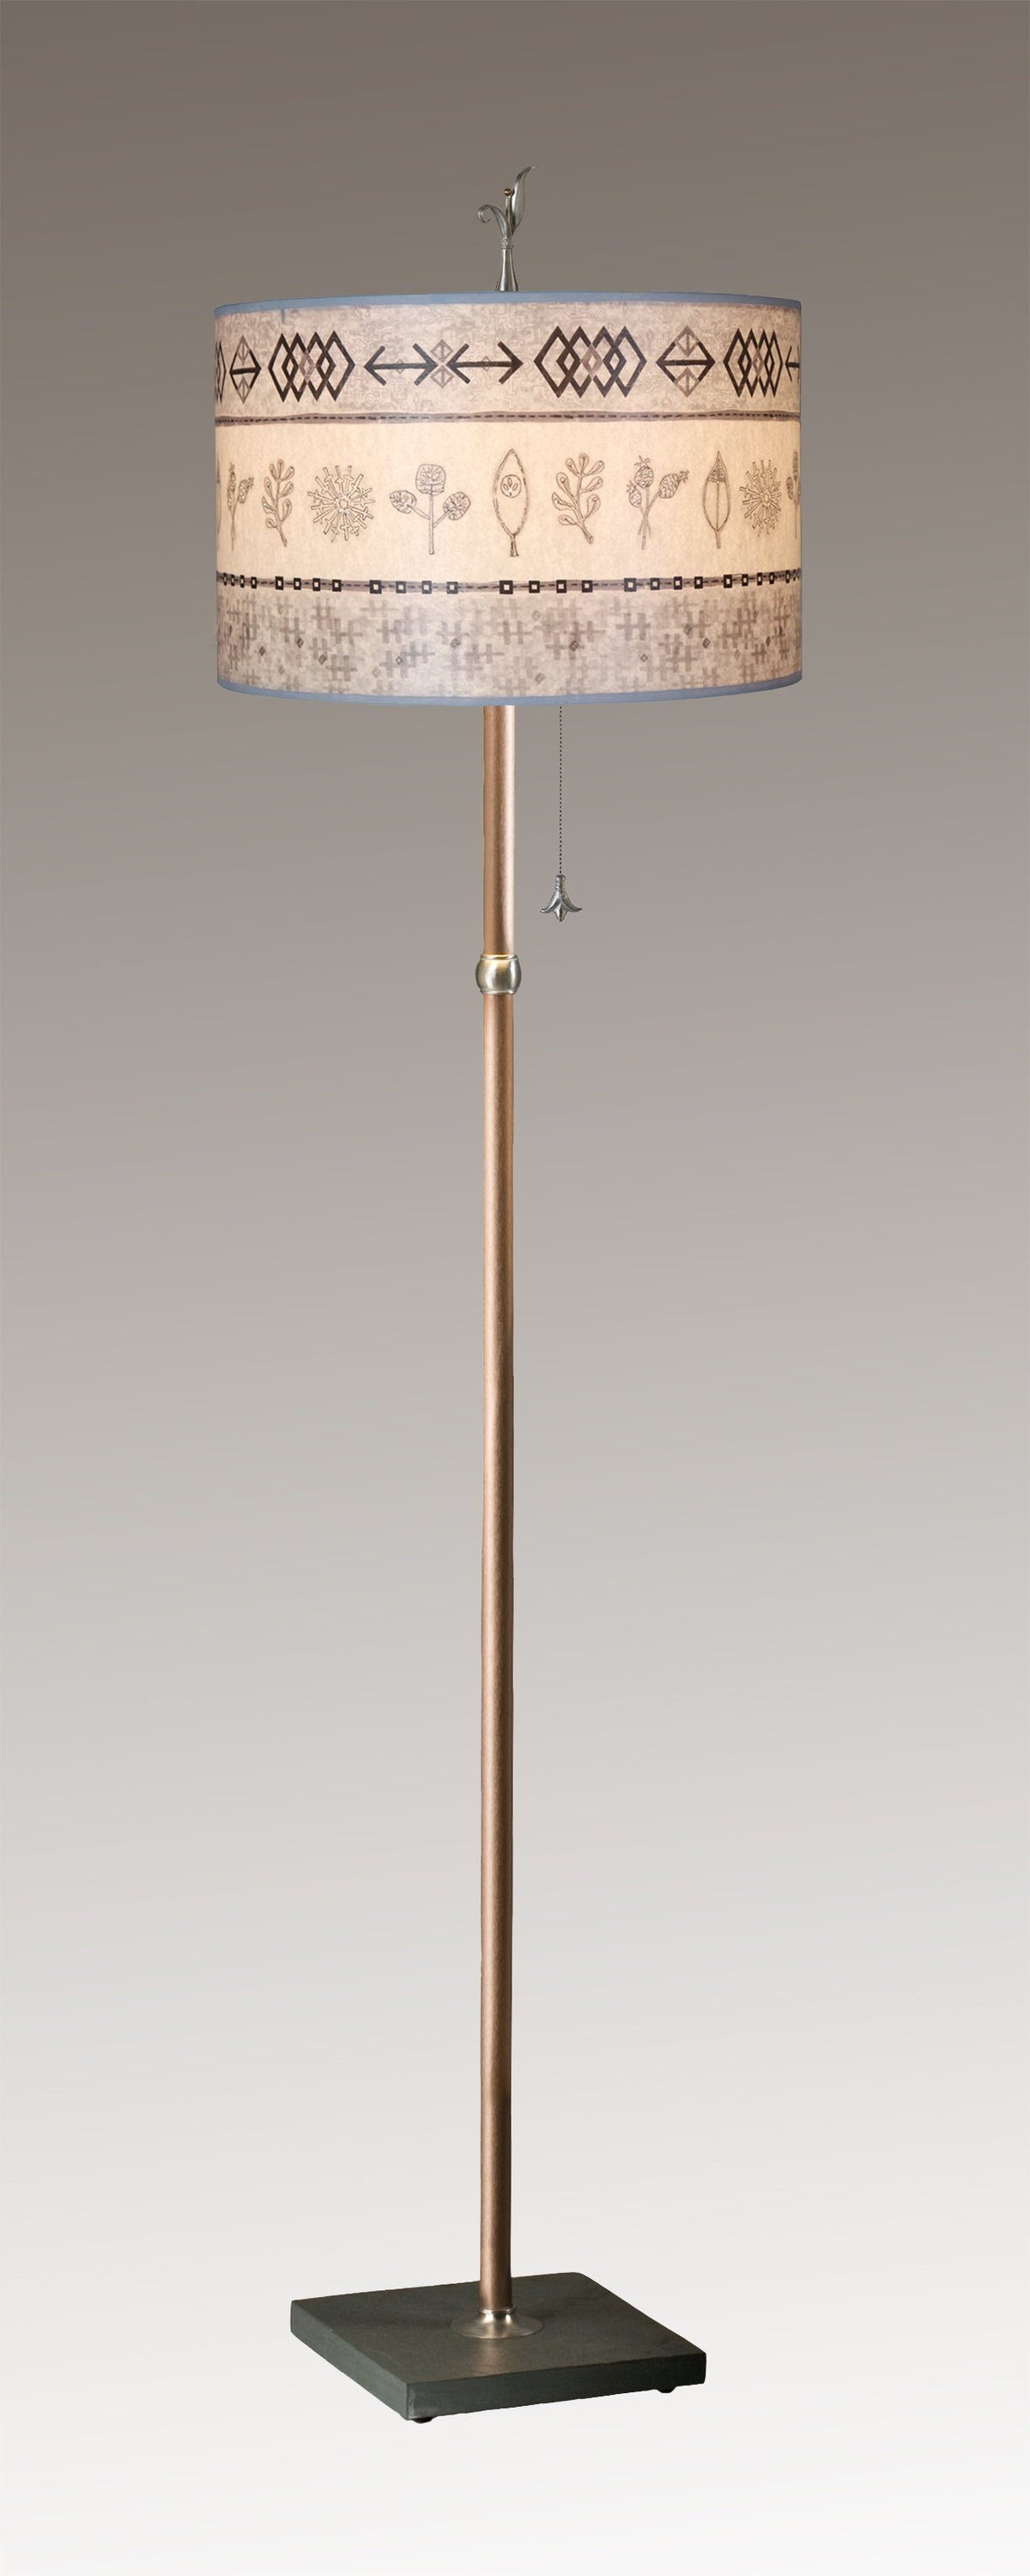 Janna Ugone &amp; Co Floor Lamps Copper Floor Lamp with Large Drum Shade in Woven &amp; Sprig in Mist